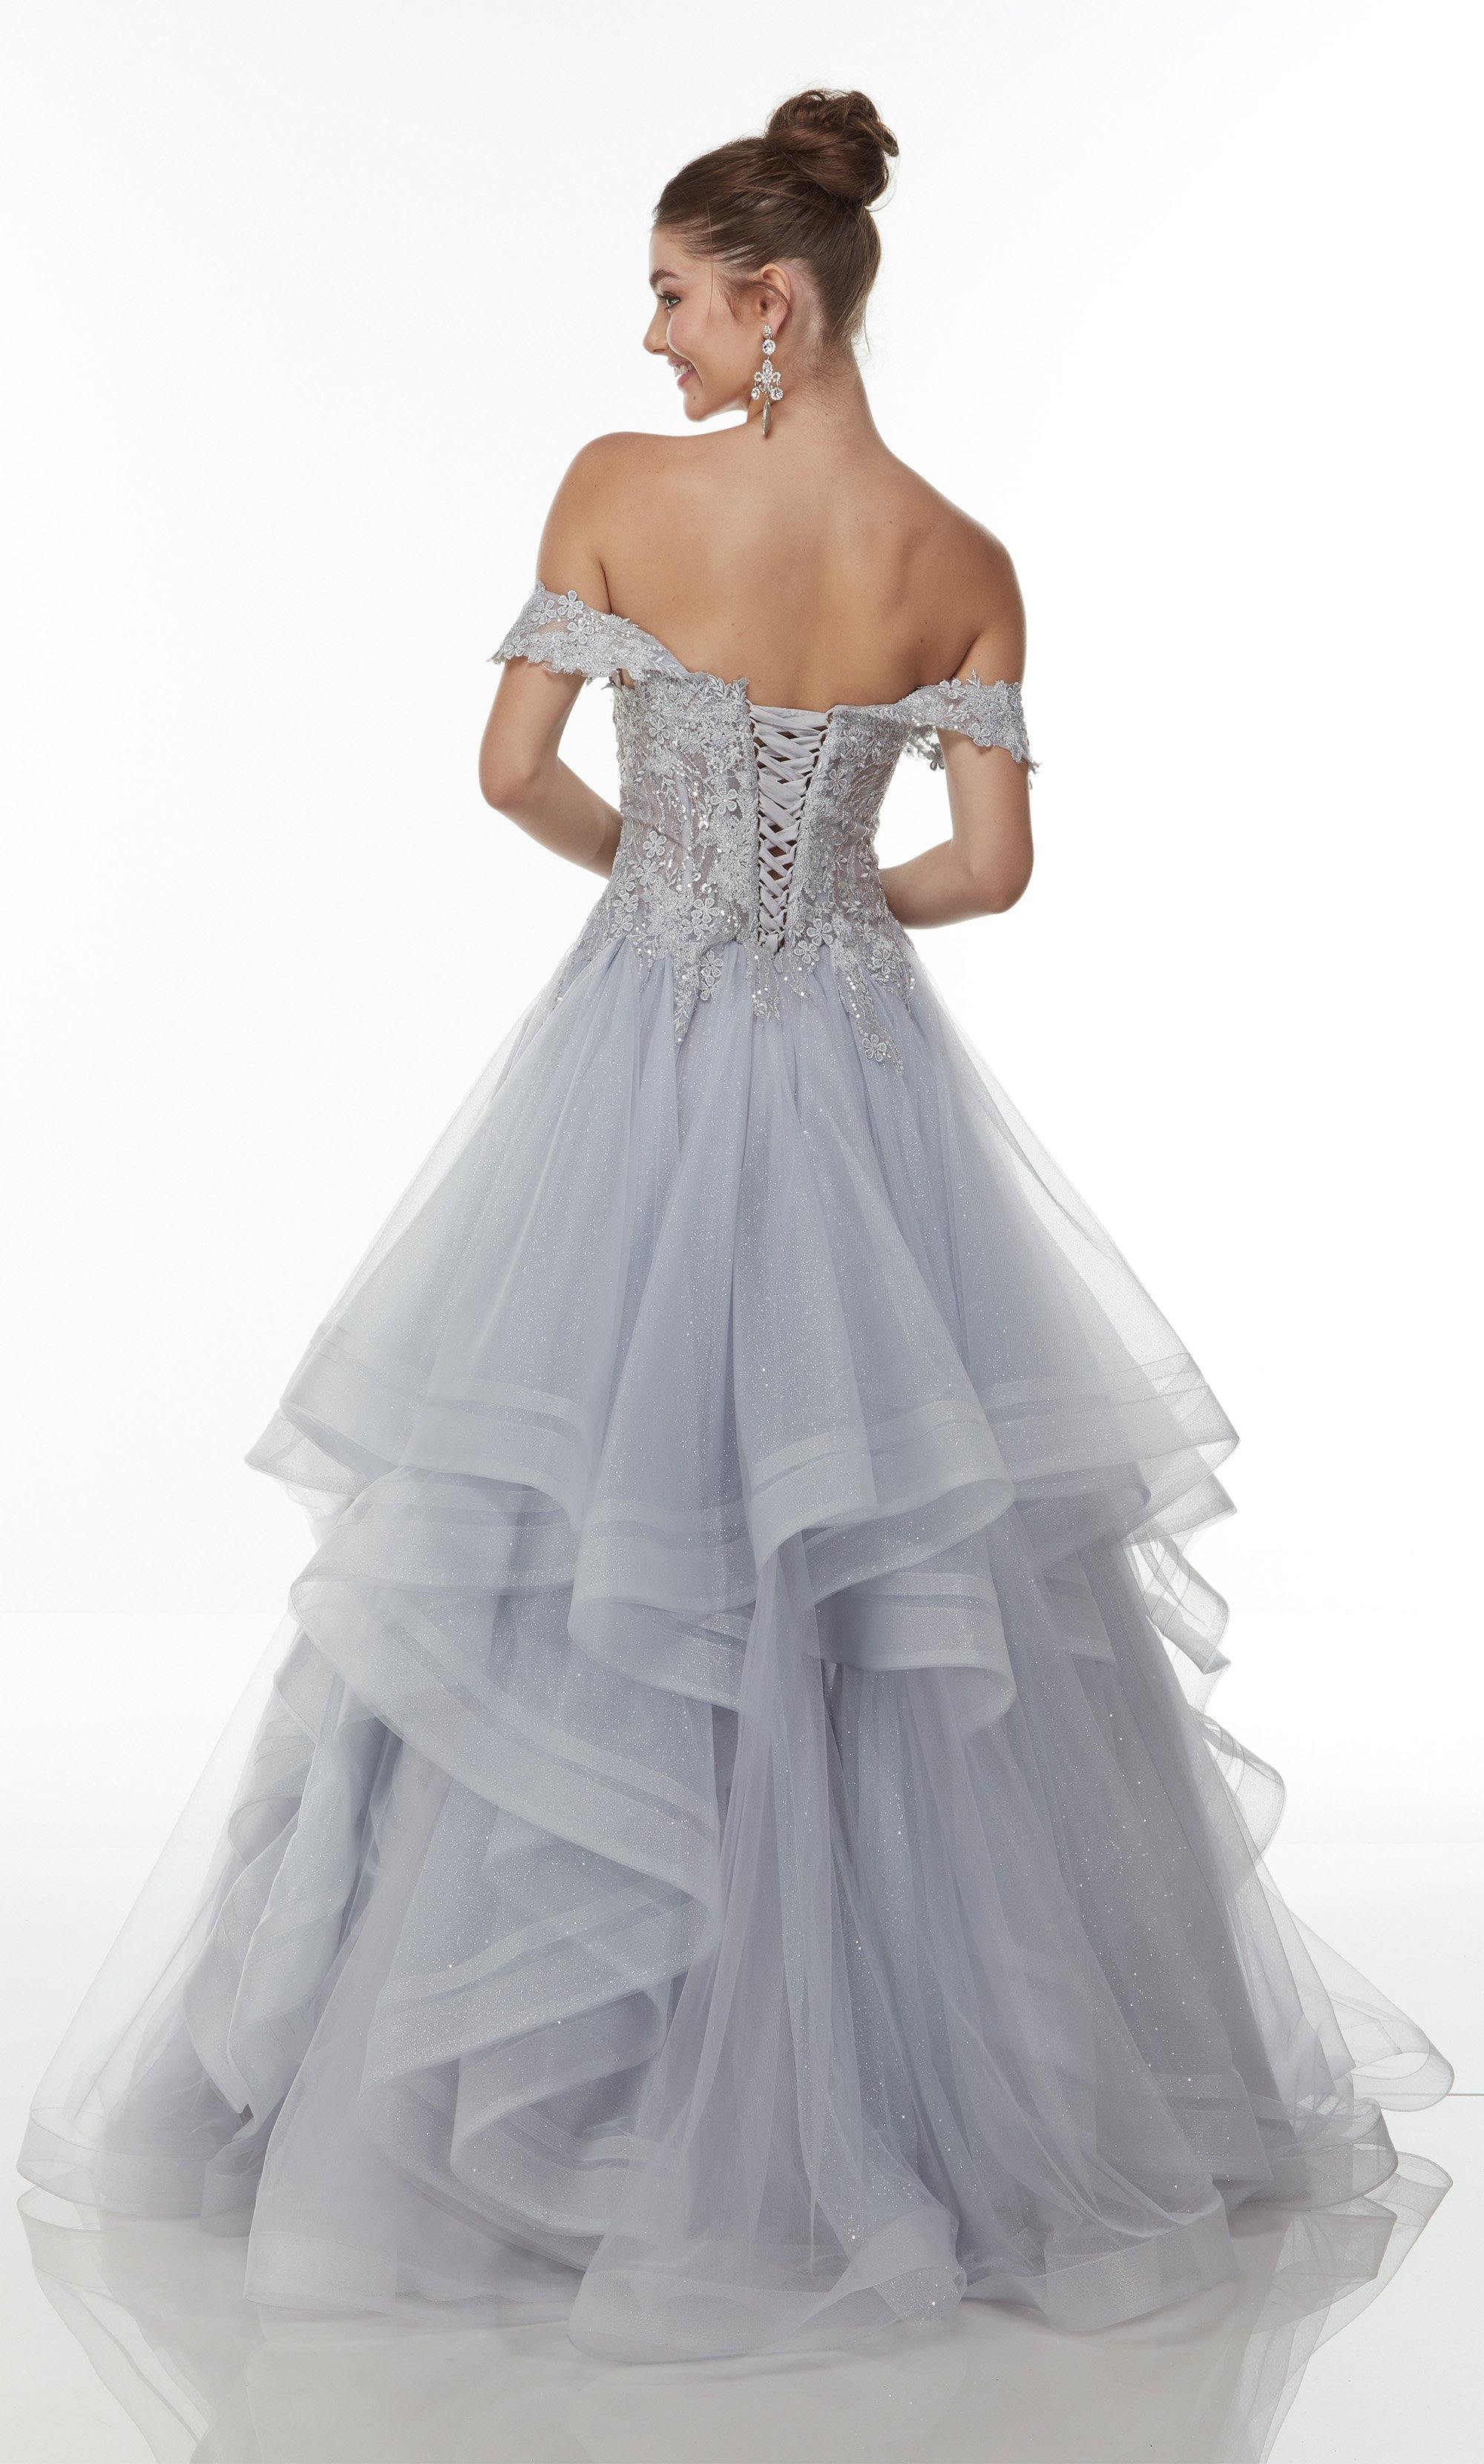 Off-the-shoulder silver ball gown with a corset bodice and sparkly, layered tulle skirt.